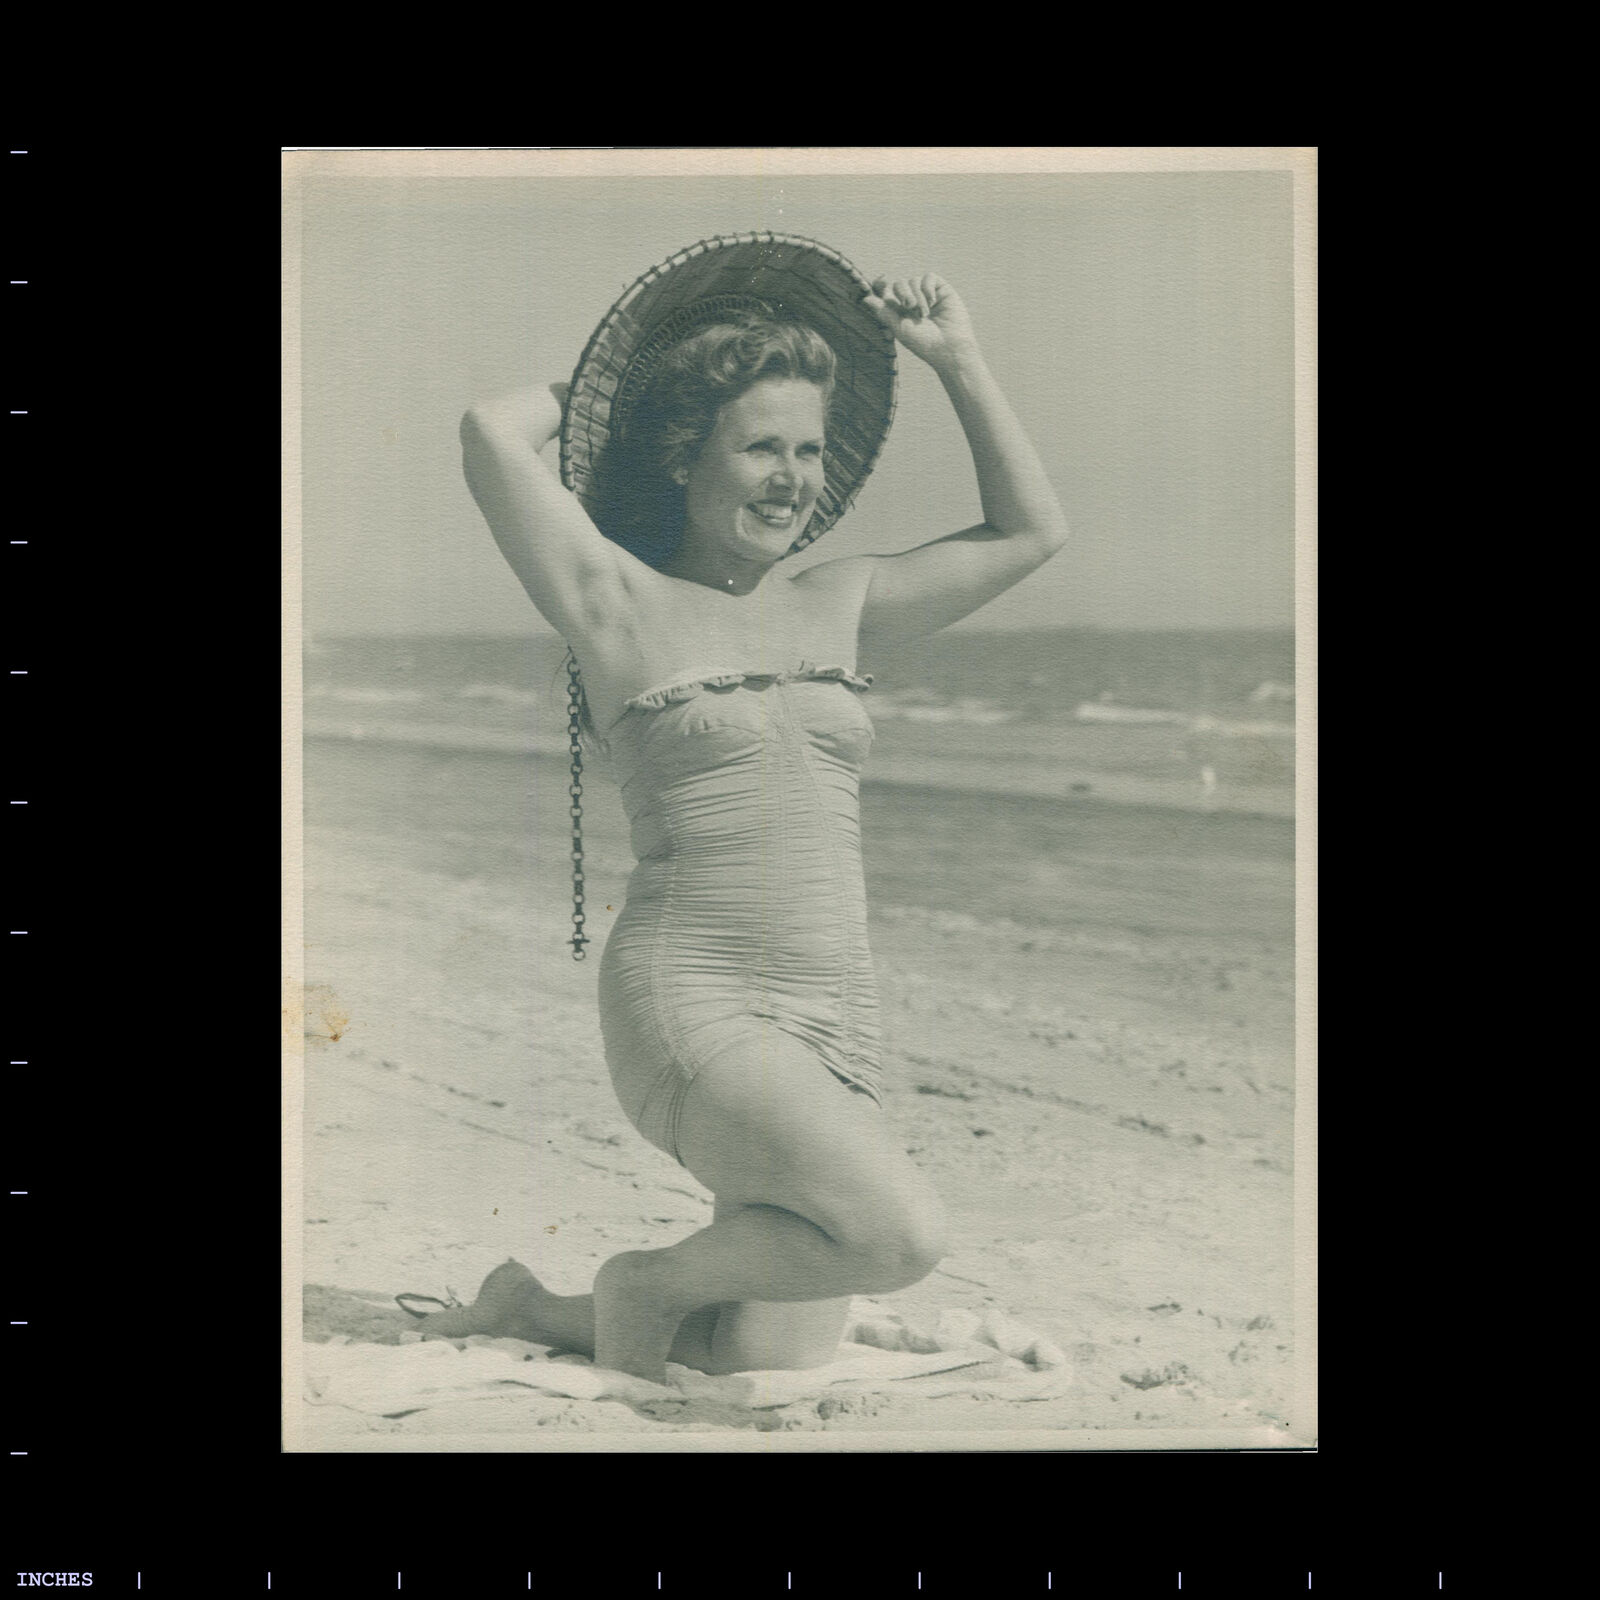 Vintage Photo BEACH SCENE WOMAN IN HAT AND SWIMSUIT